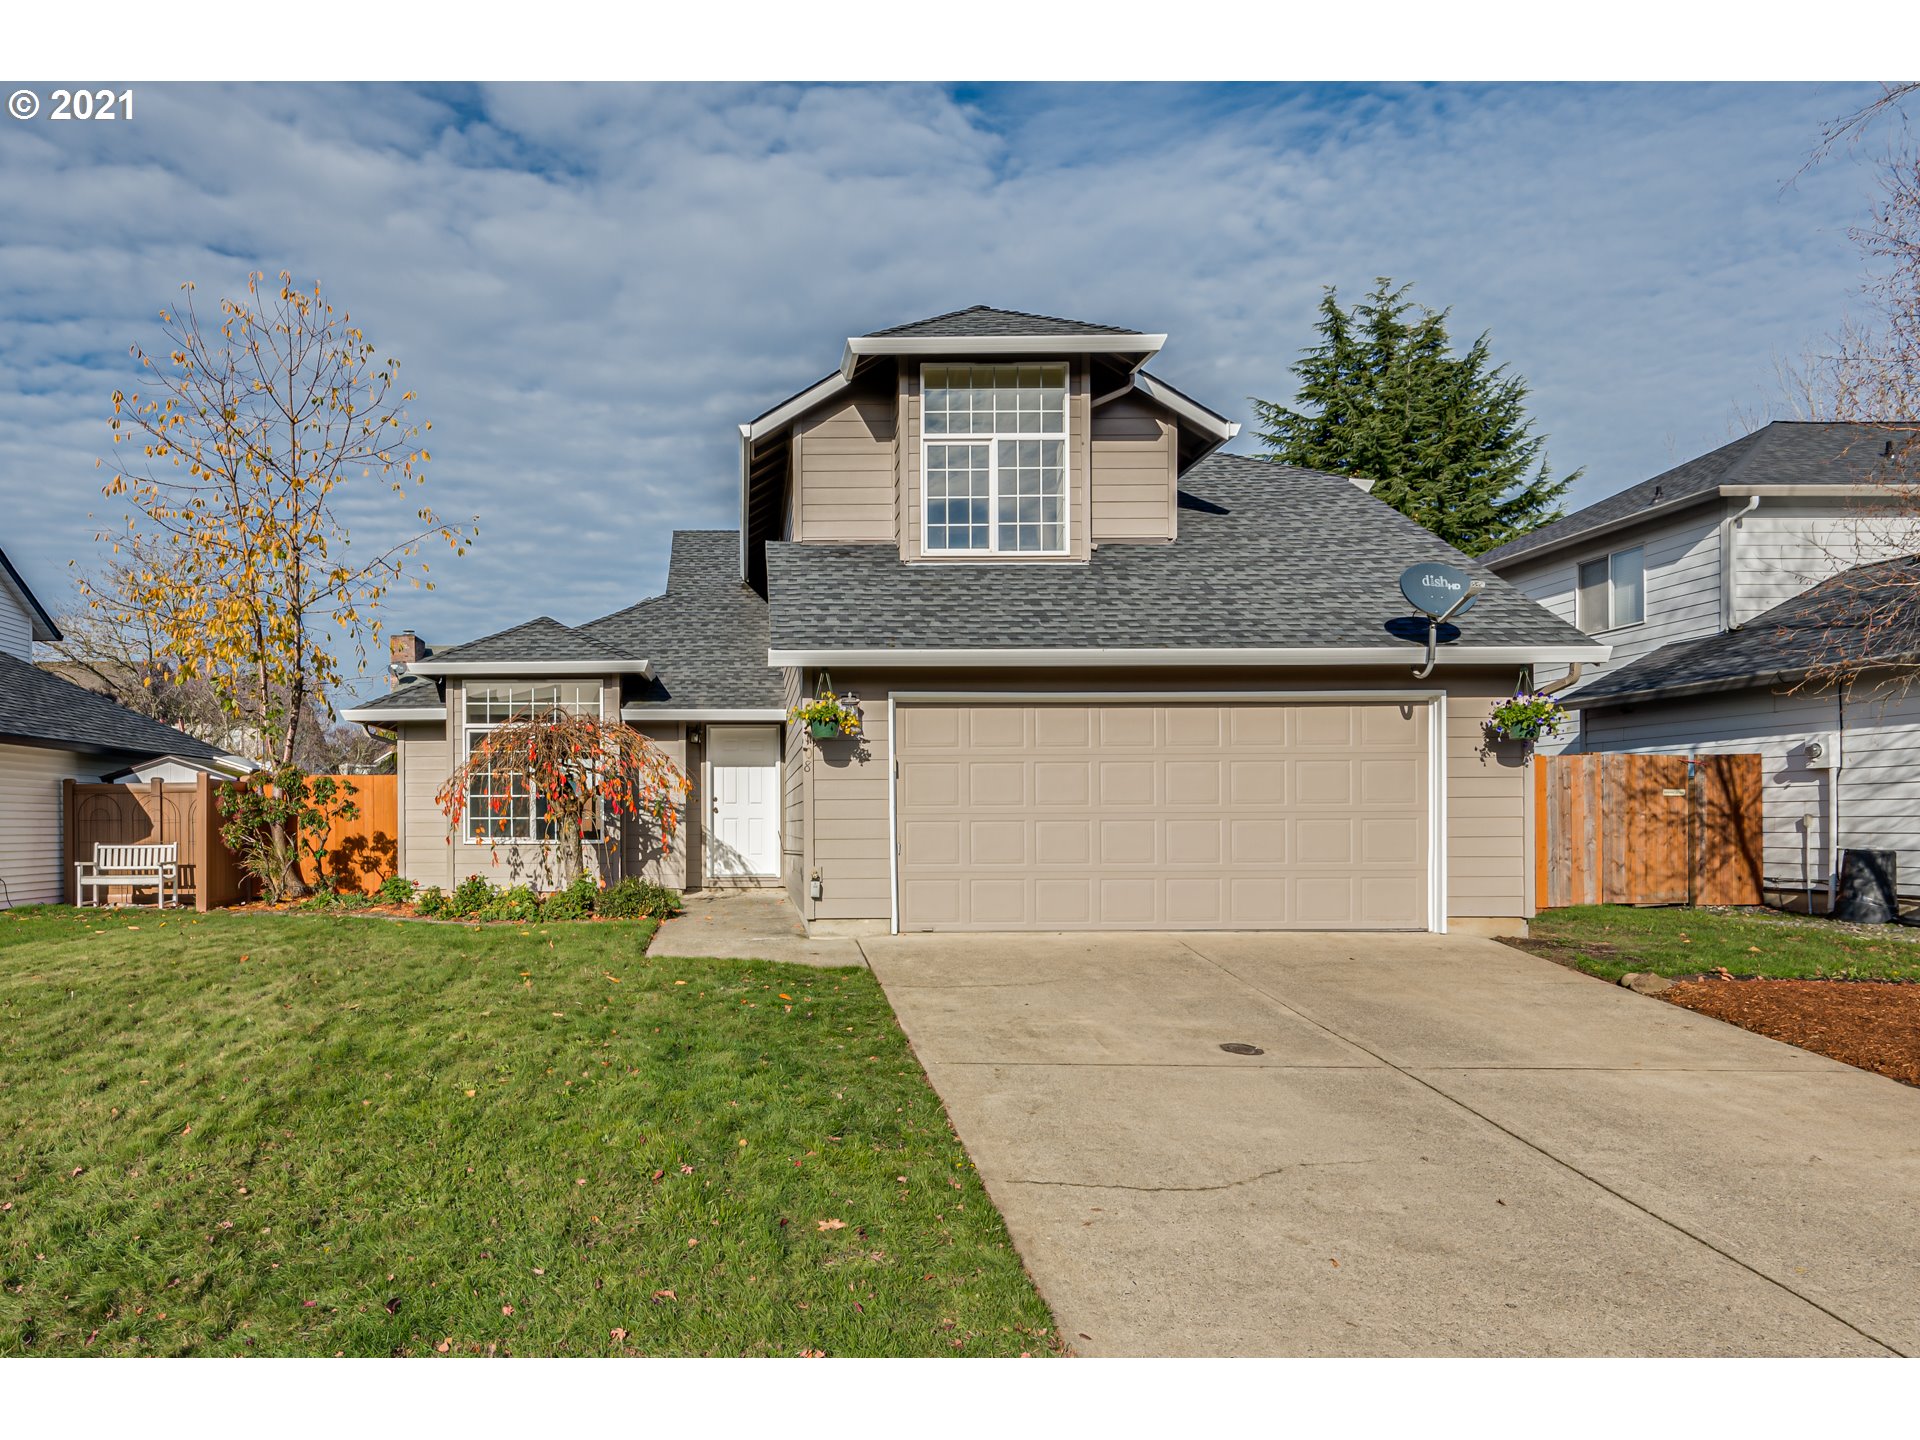 2108 NW 140TH ST (1 of 29)